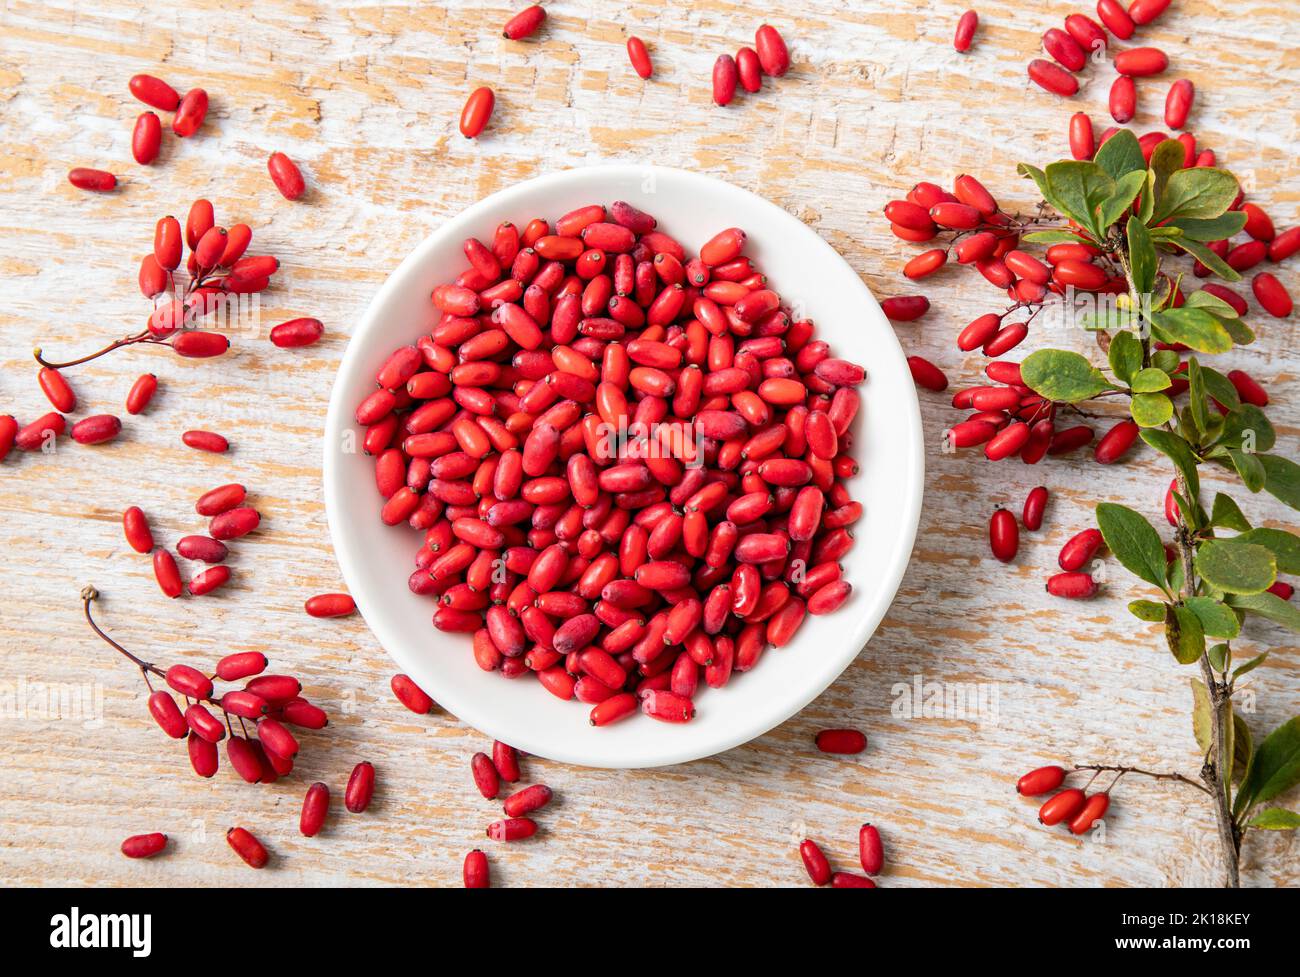 Pile of Berberis vulgaris also known as common barberry, European barberry or barberry on plate in home kicthen. Edible herbal medicinal fruit. Stock Photo